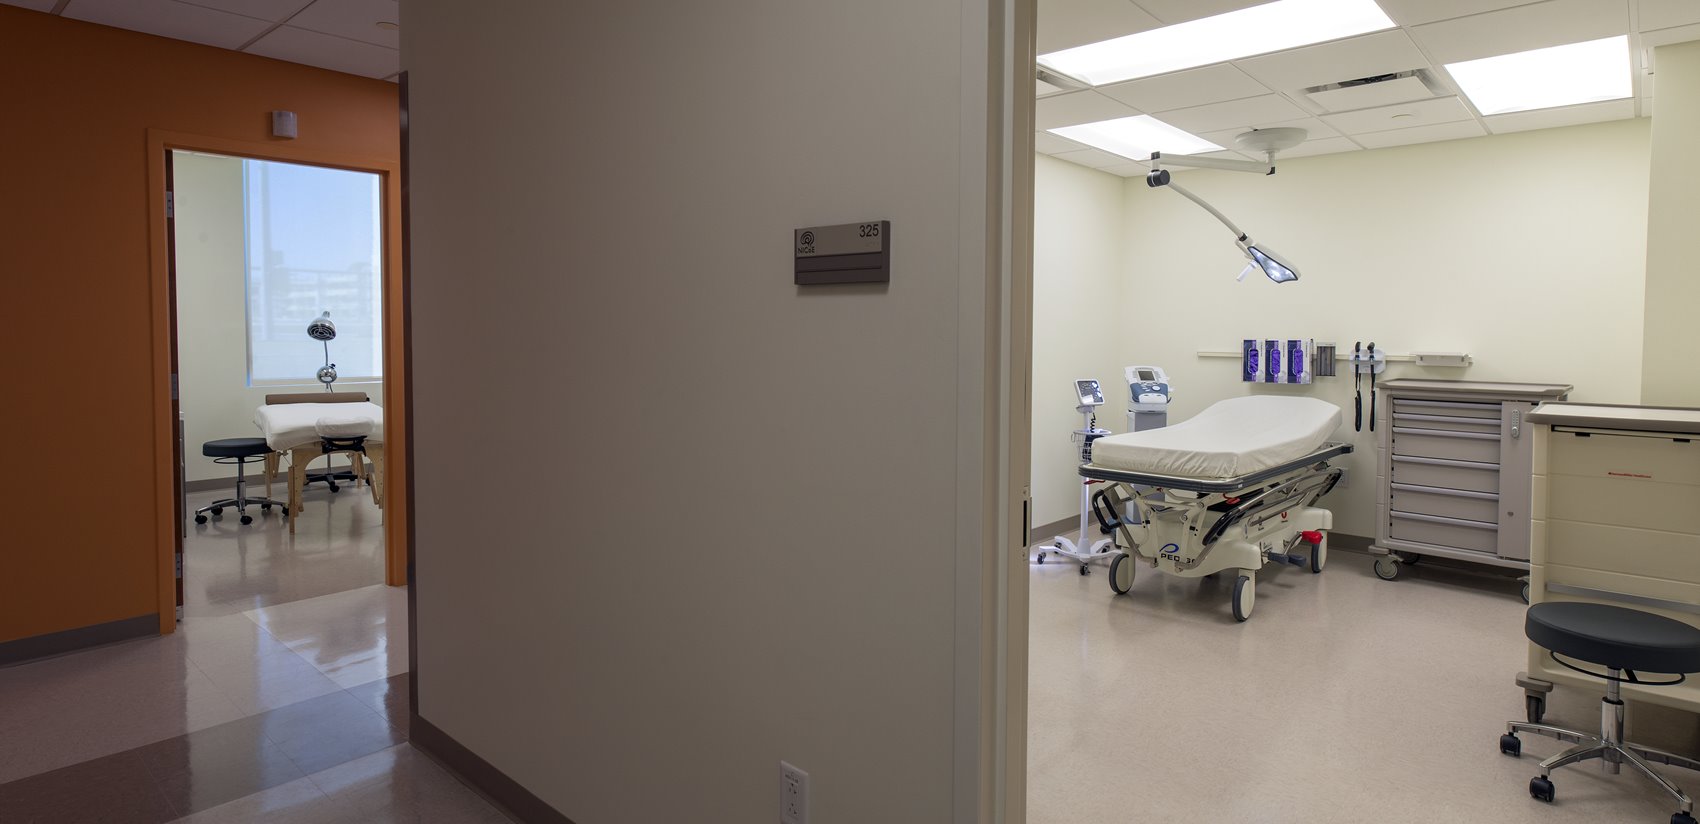 Exam rooms inside the National Intrepid Center of Excellence facility in Fort Hood